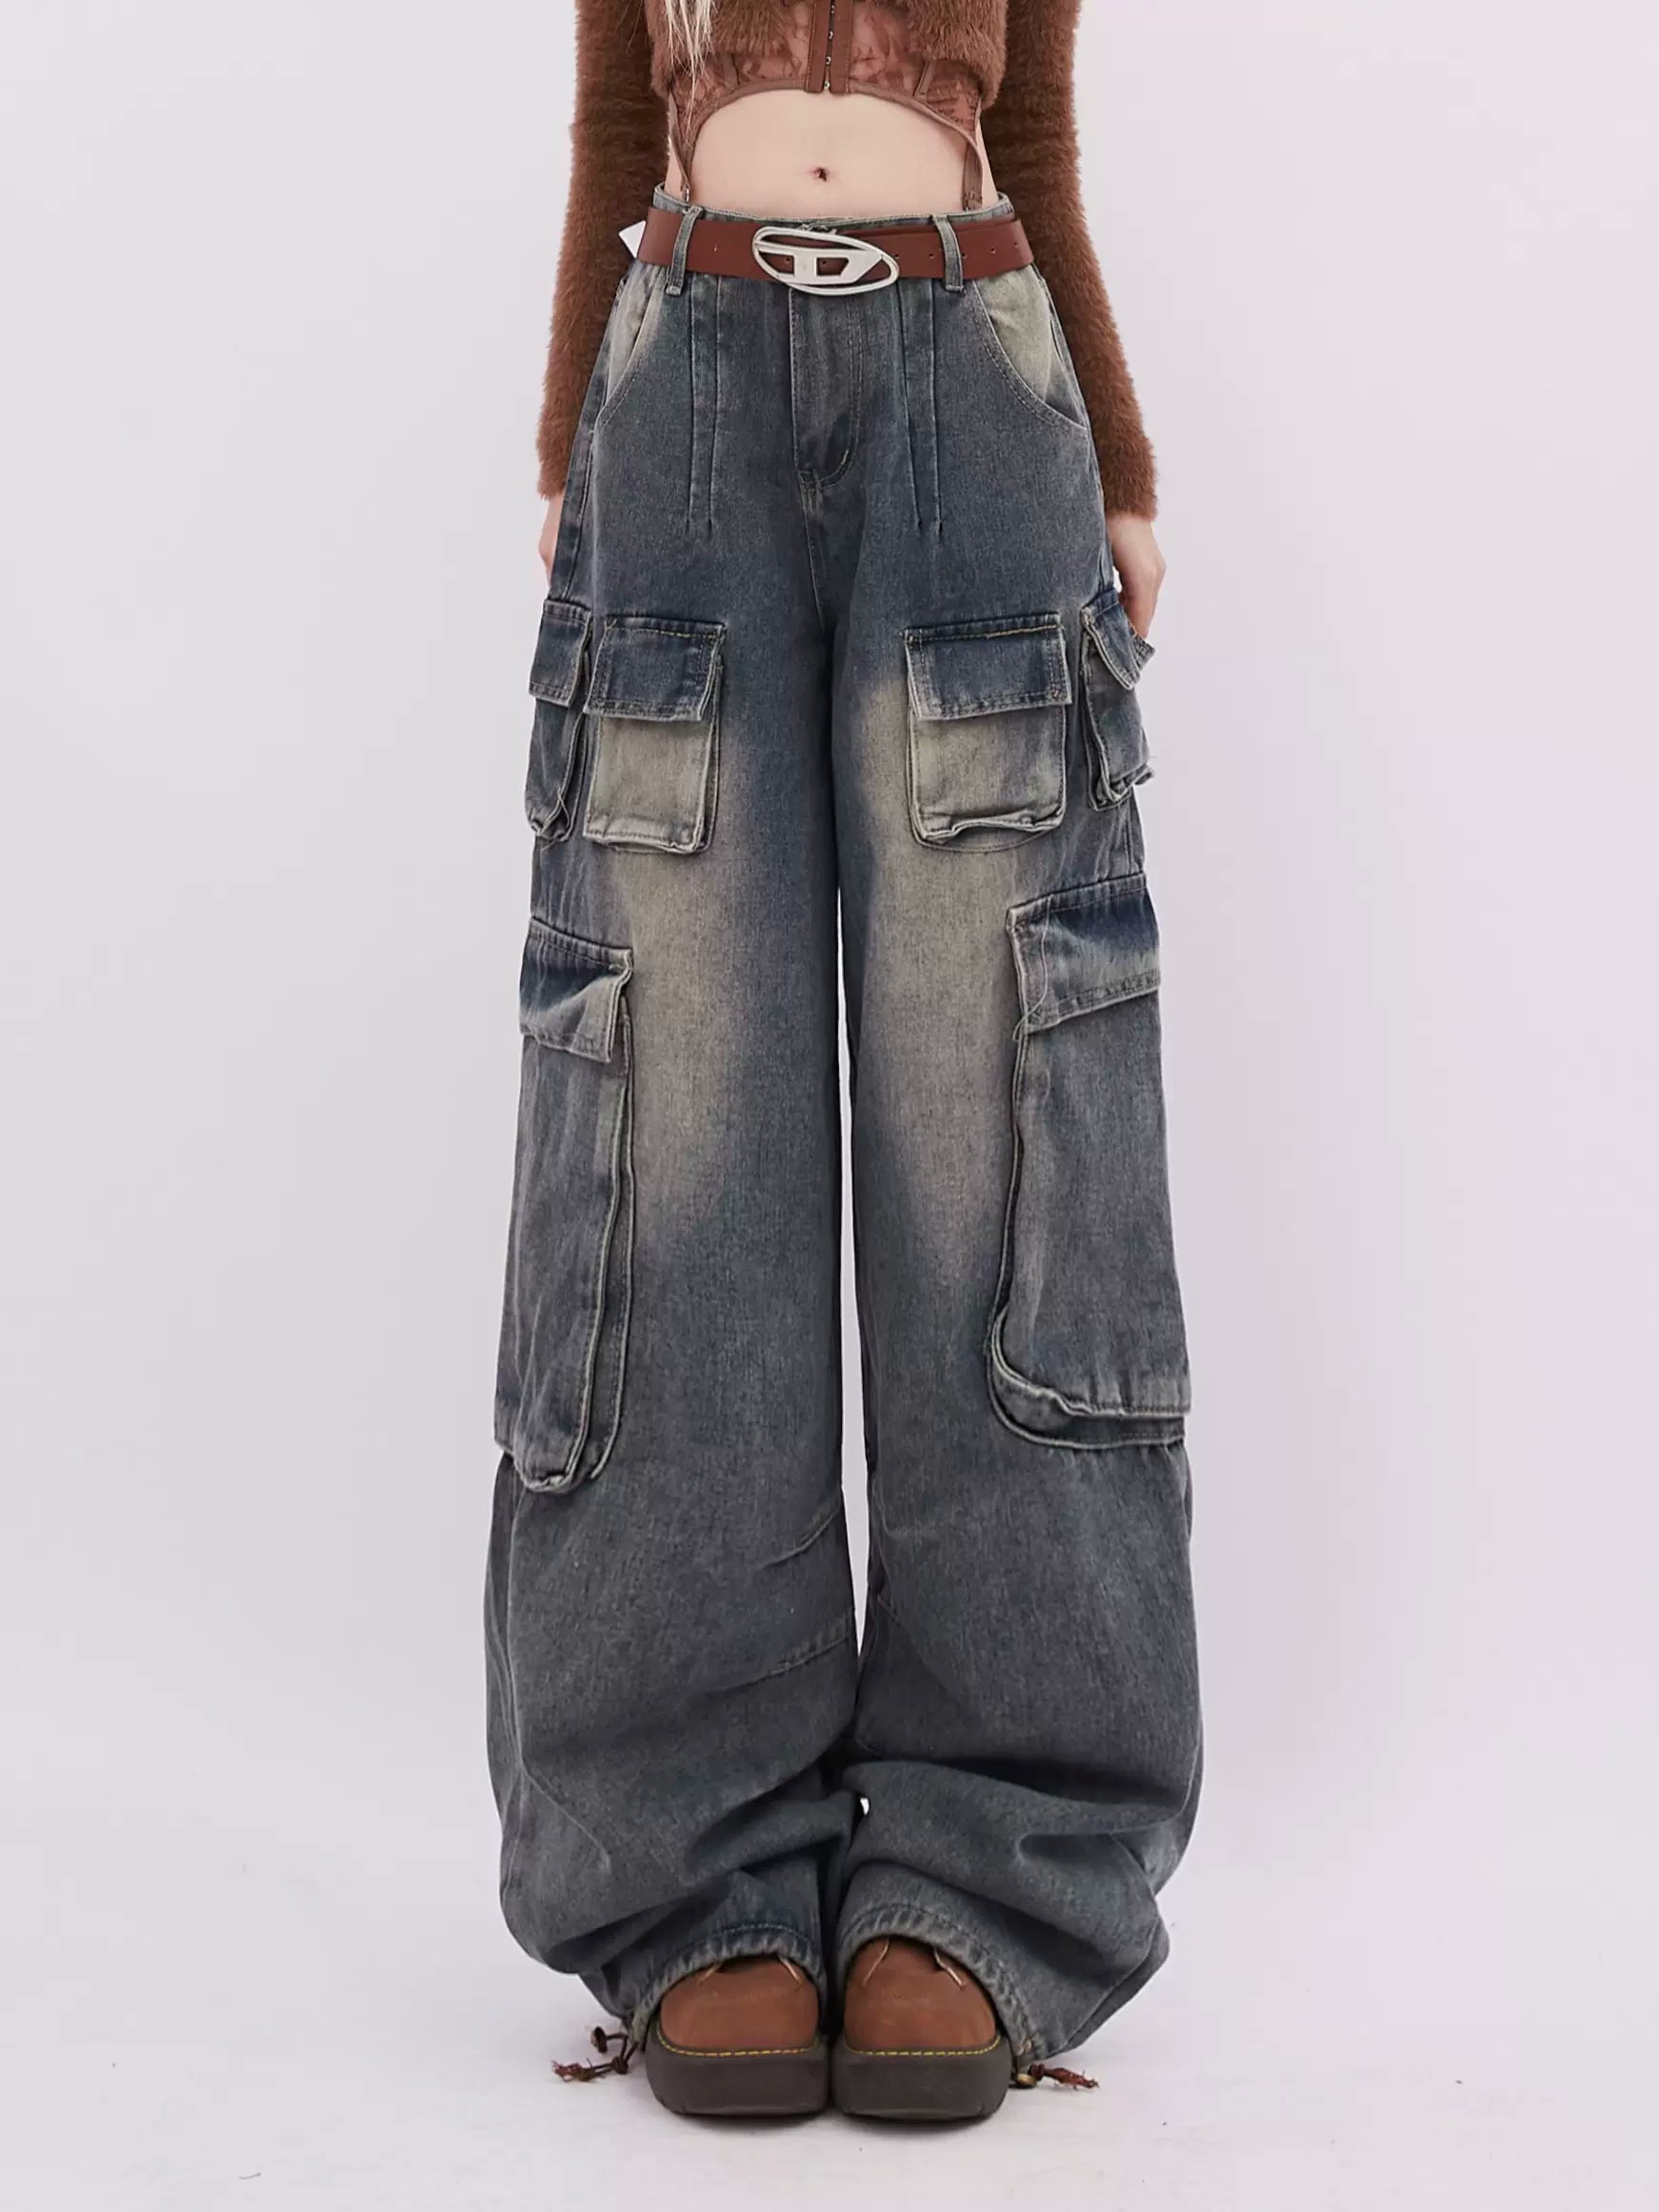 Distressed Washed Multi-Pocket Jeans - chiclara